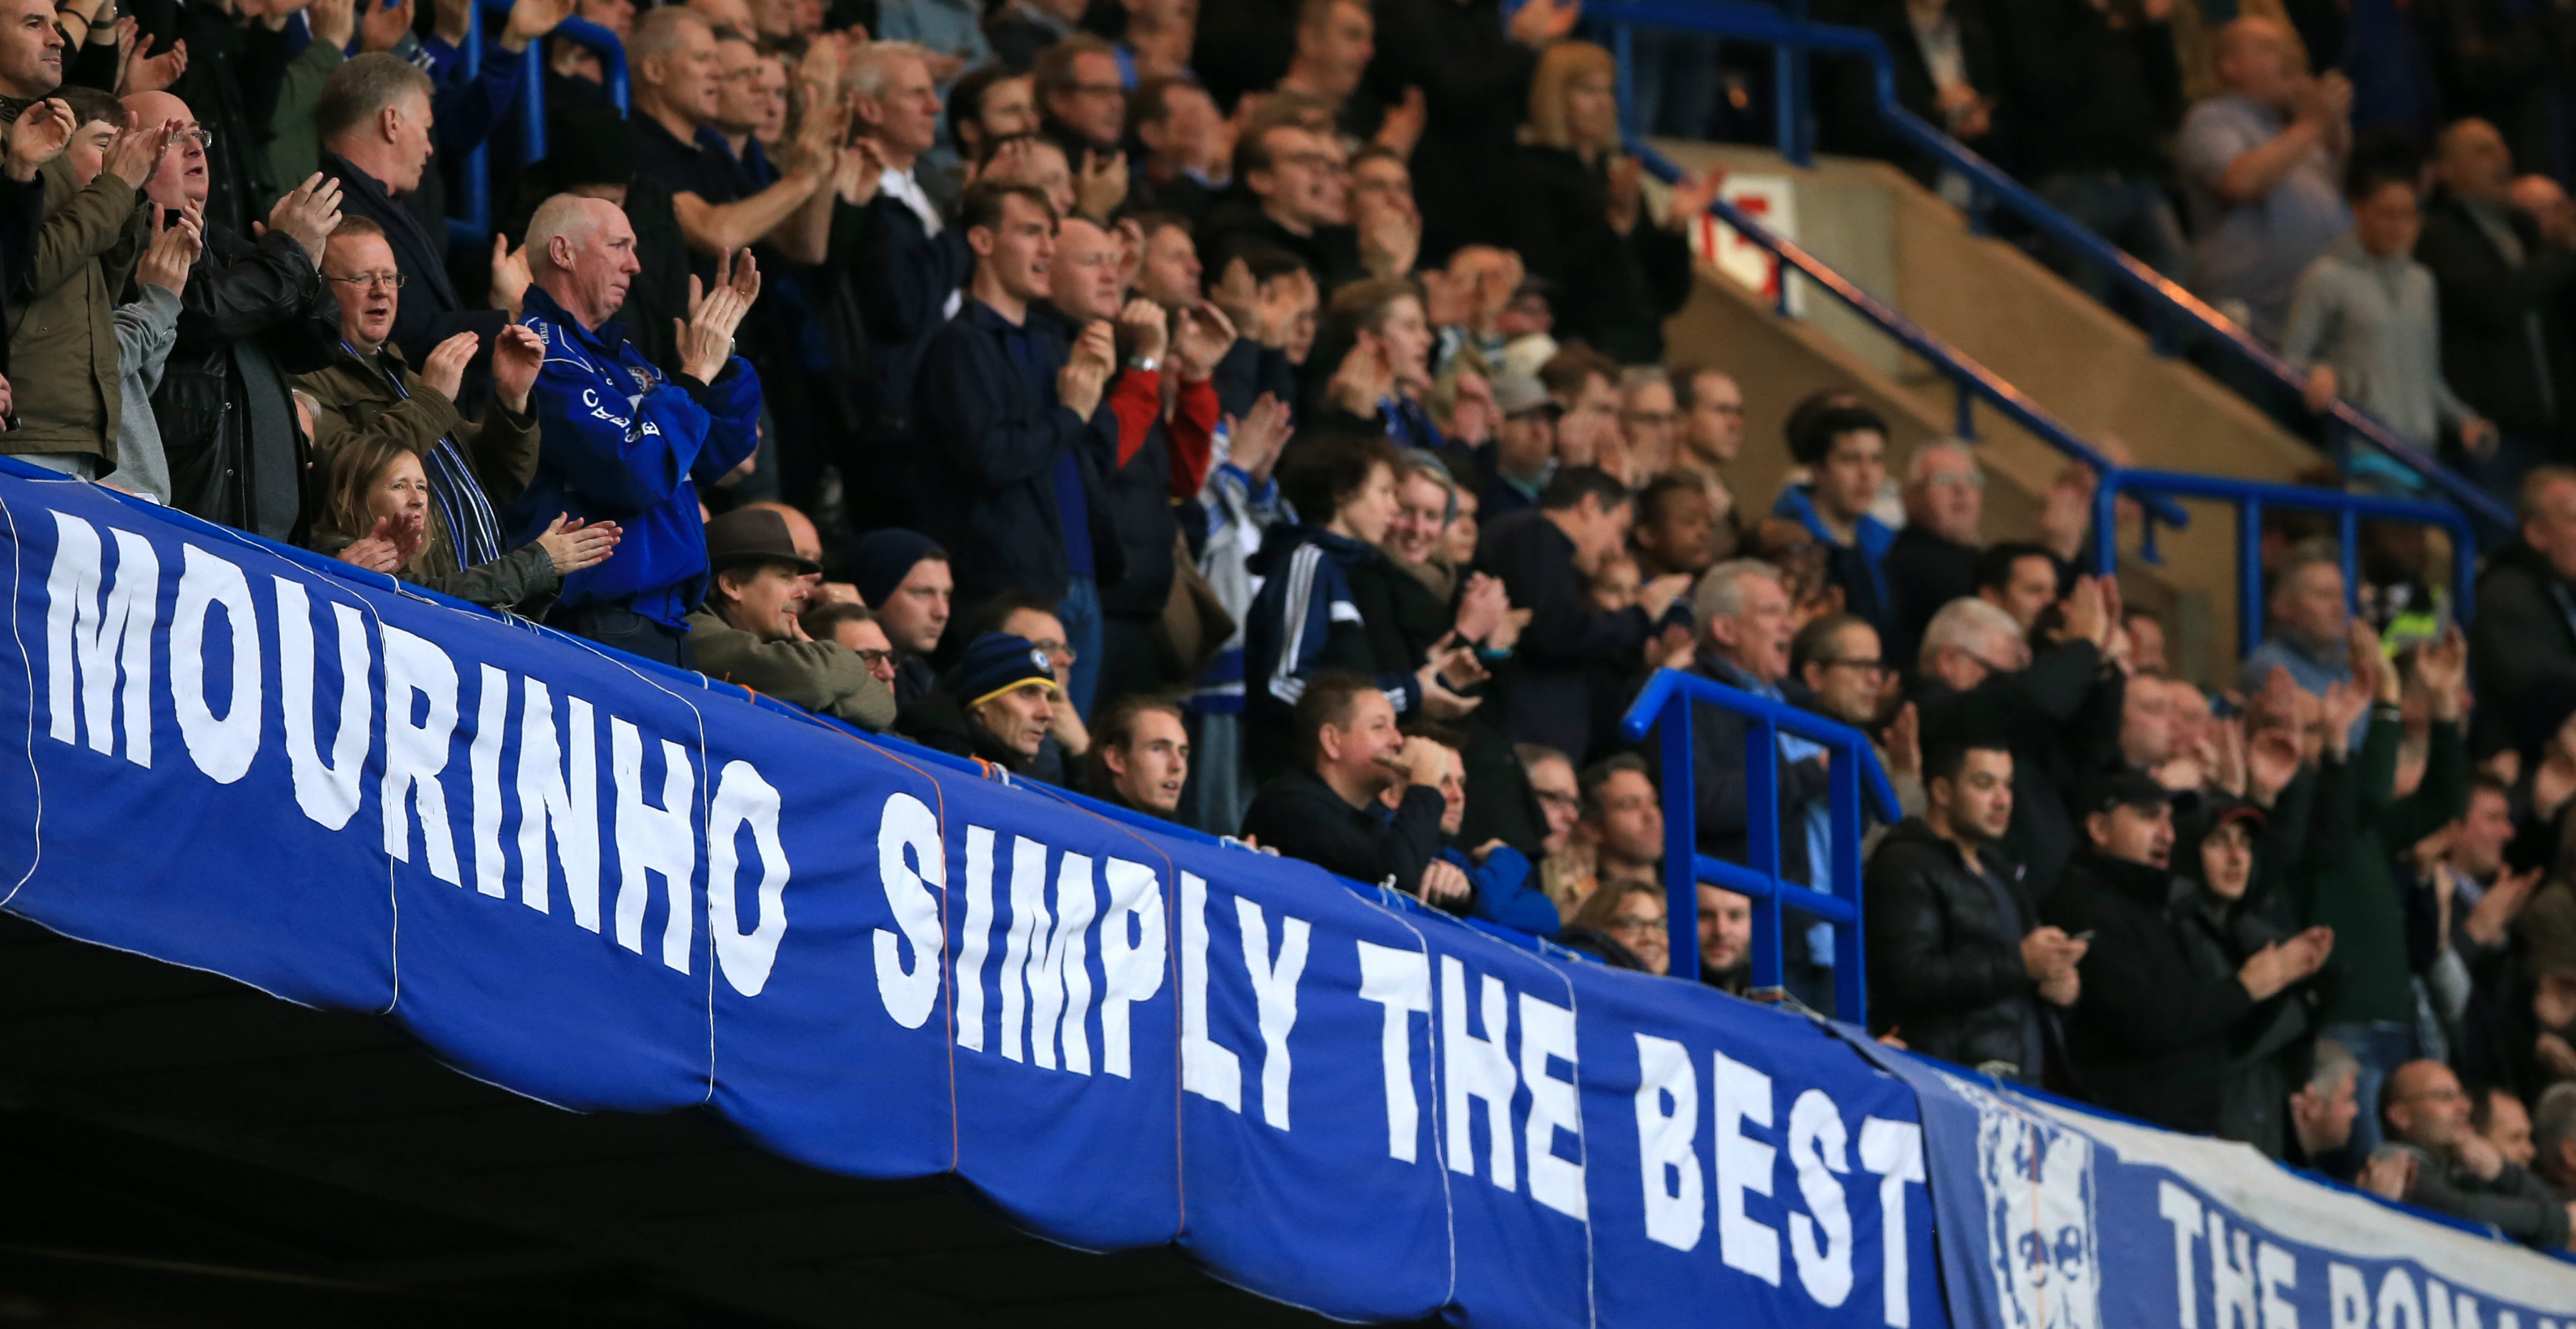 Chelsea fans chanted Mourinho's name throughout the Sunderland match